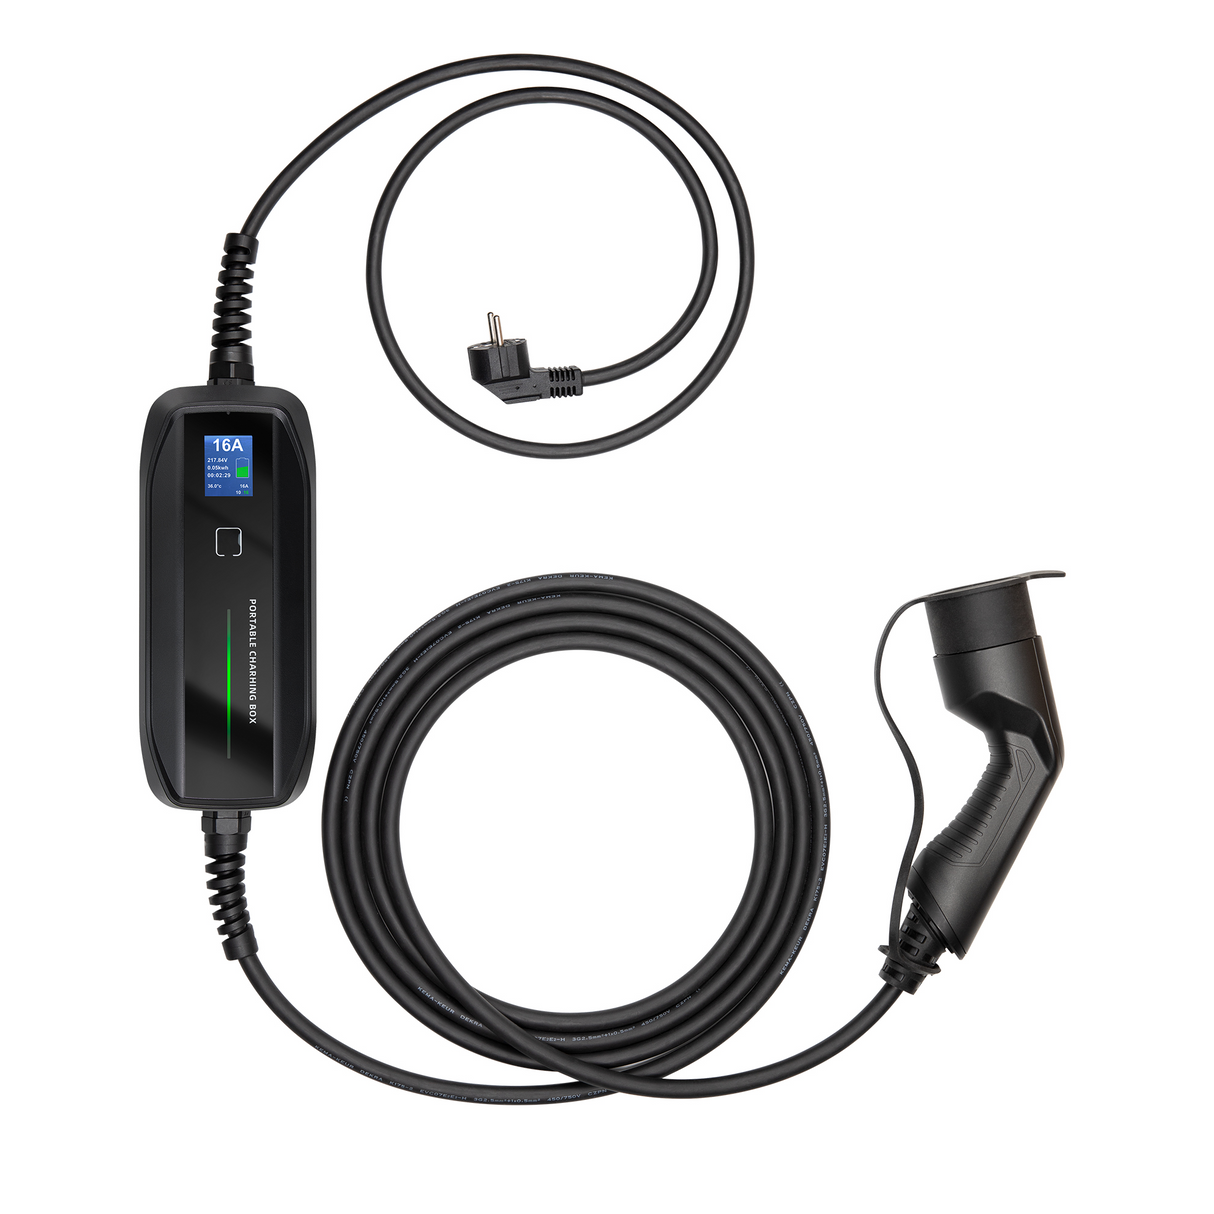 Mobile Charger Zeekr 001 - Besen with LCD - Type 2 to Schuko